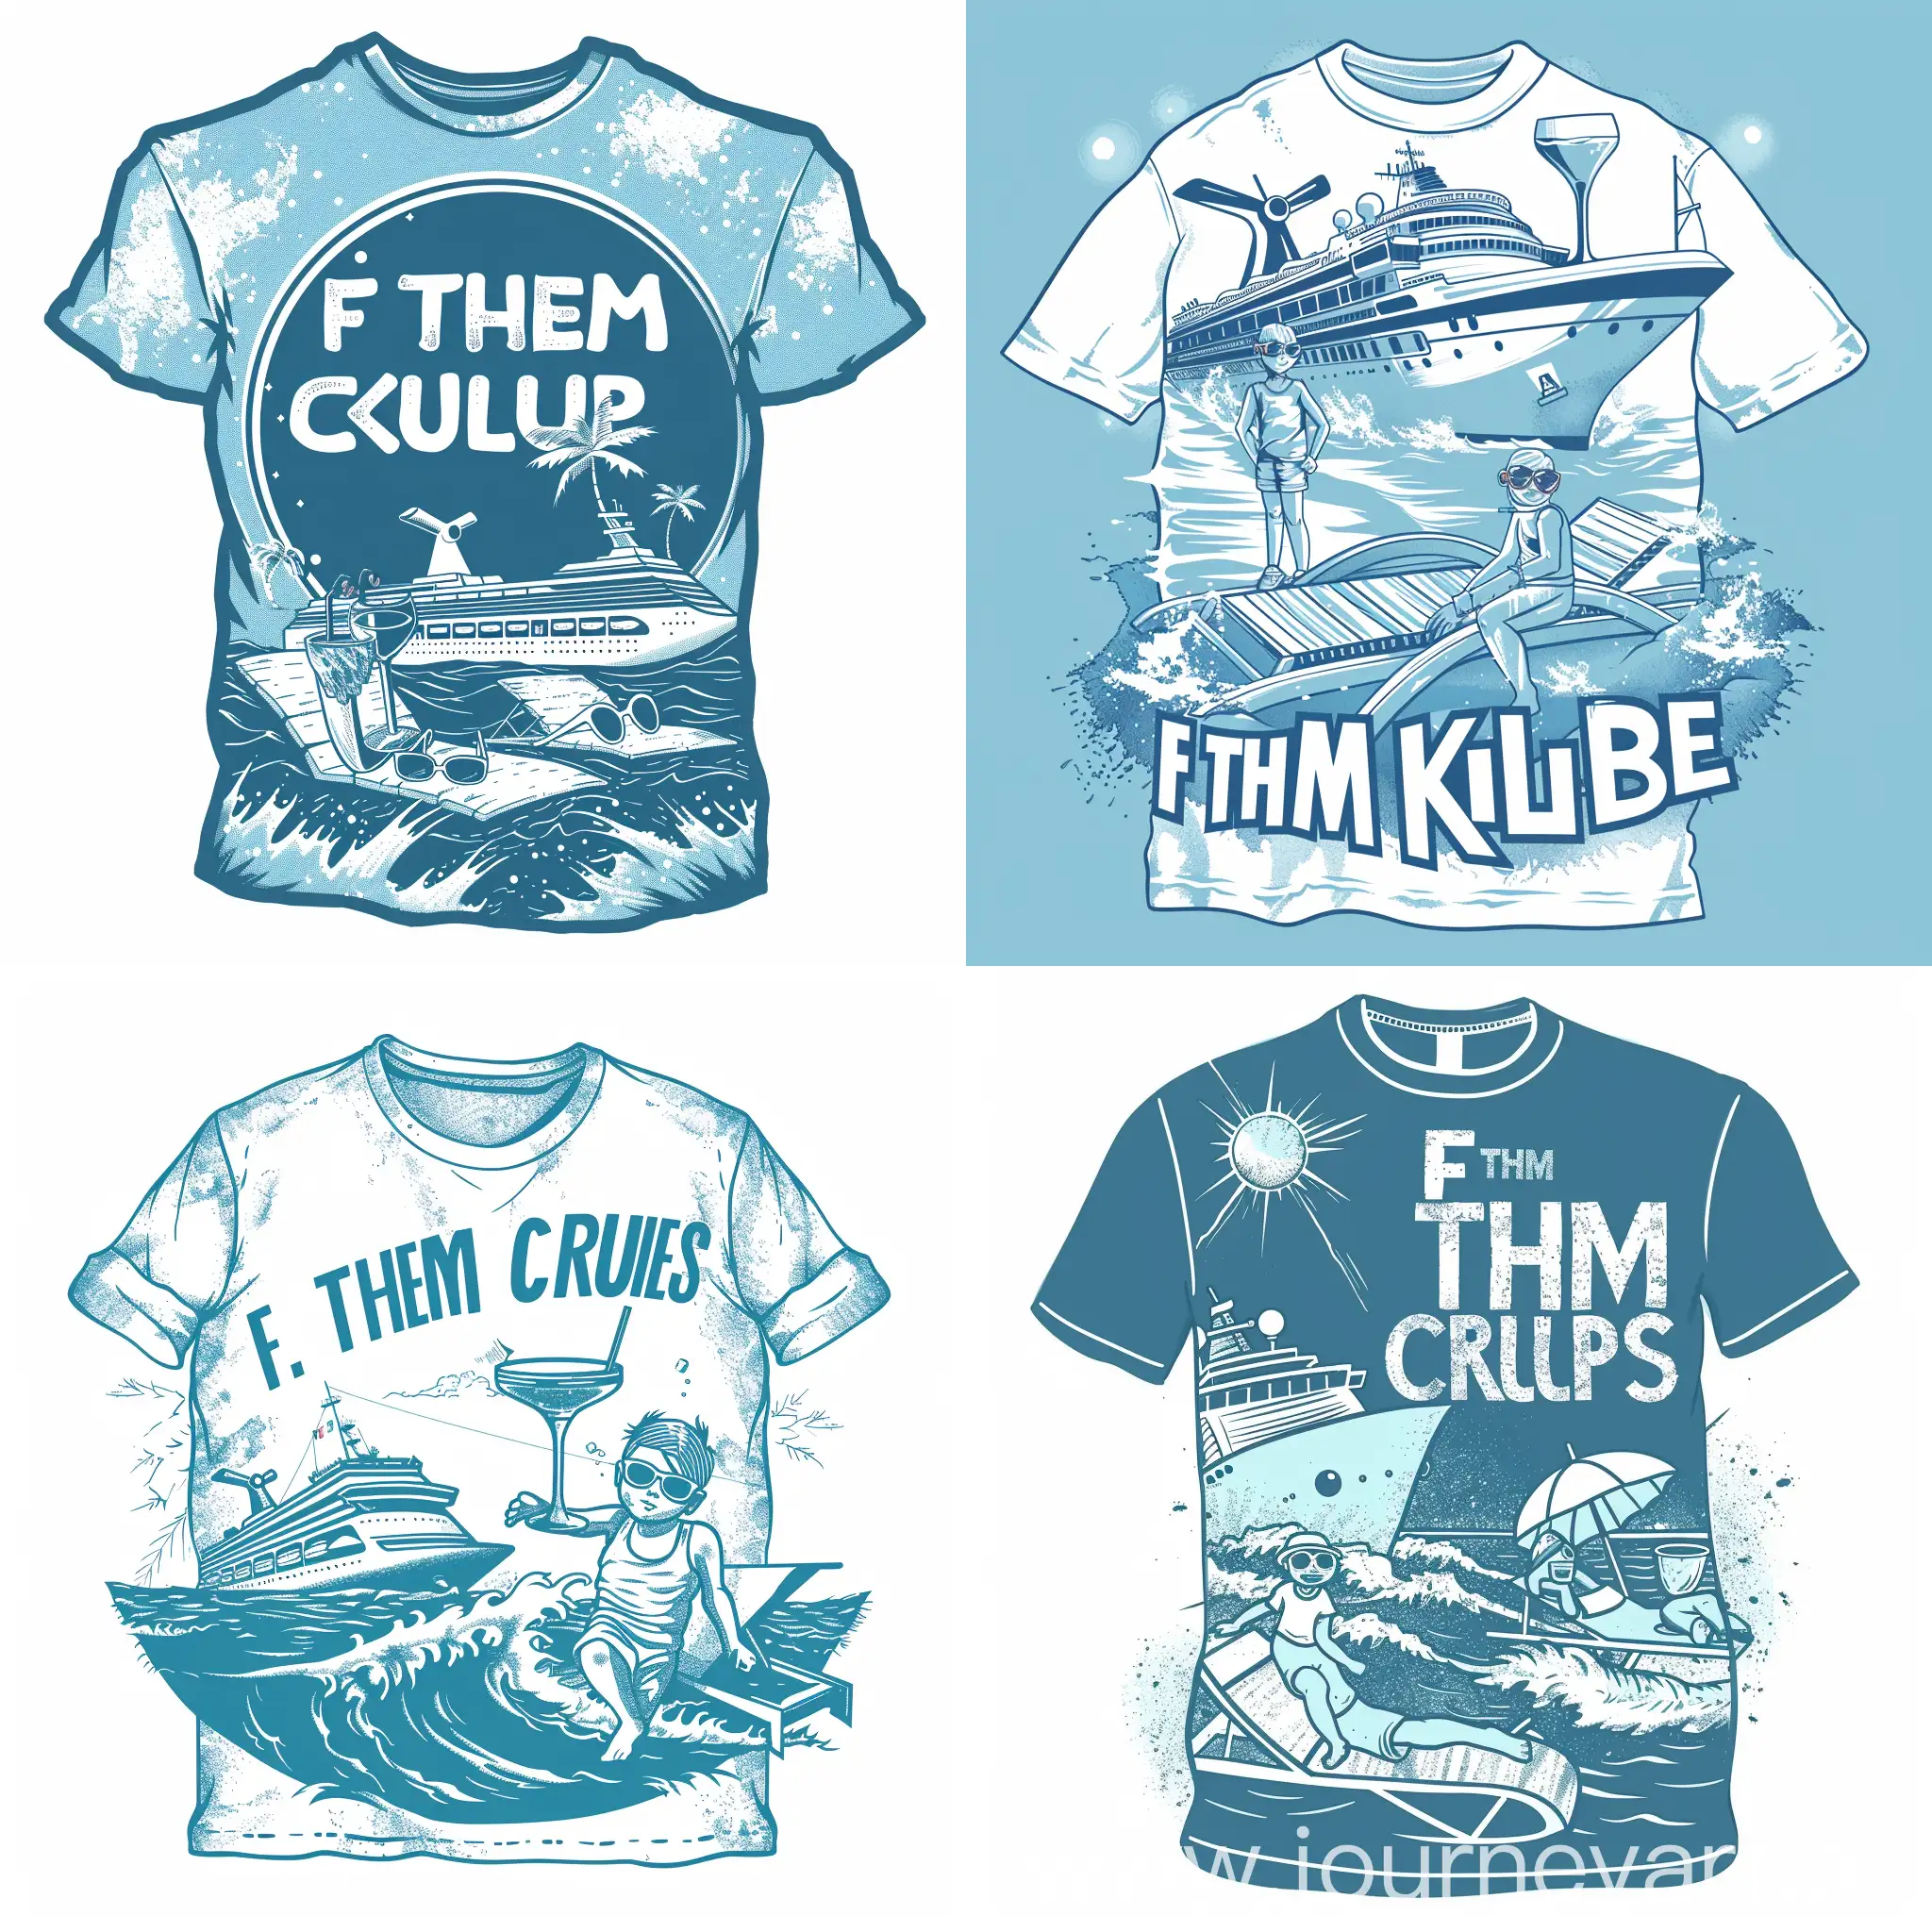 shirt design with playfont, cruise ship, waves, cocktail glass, sun lounger, sunglasses. colors white and blue, text reads "F THEM KIDS CRUISE"